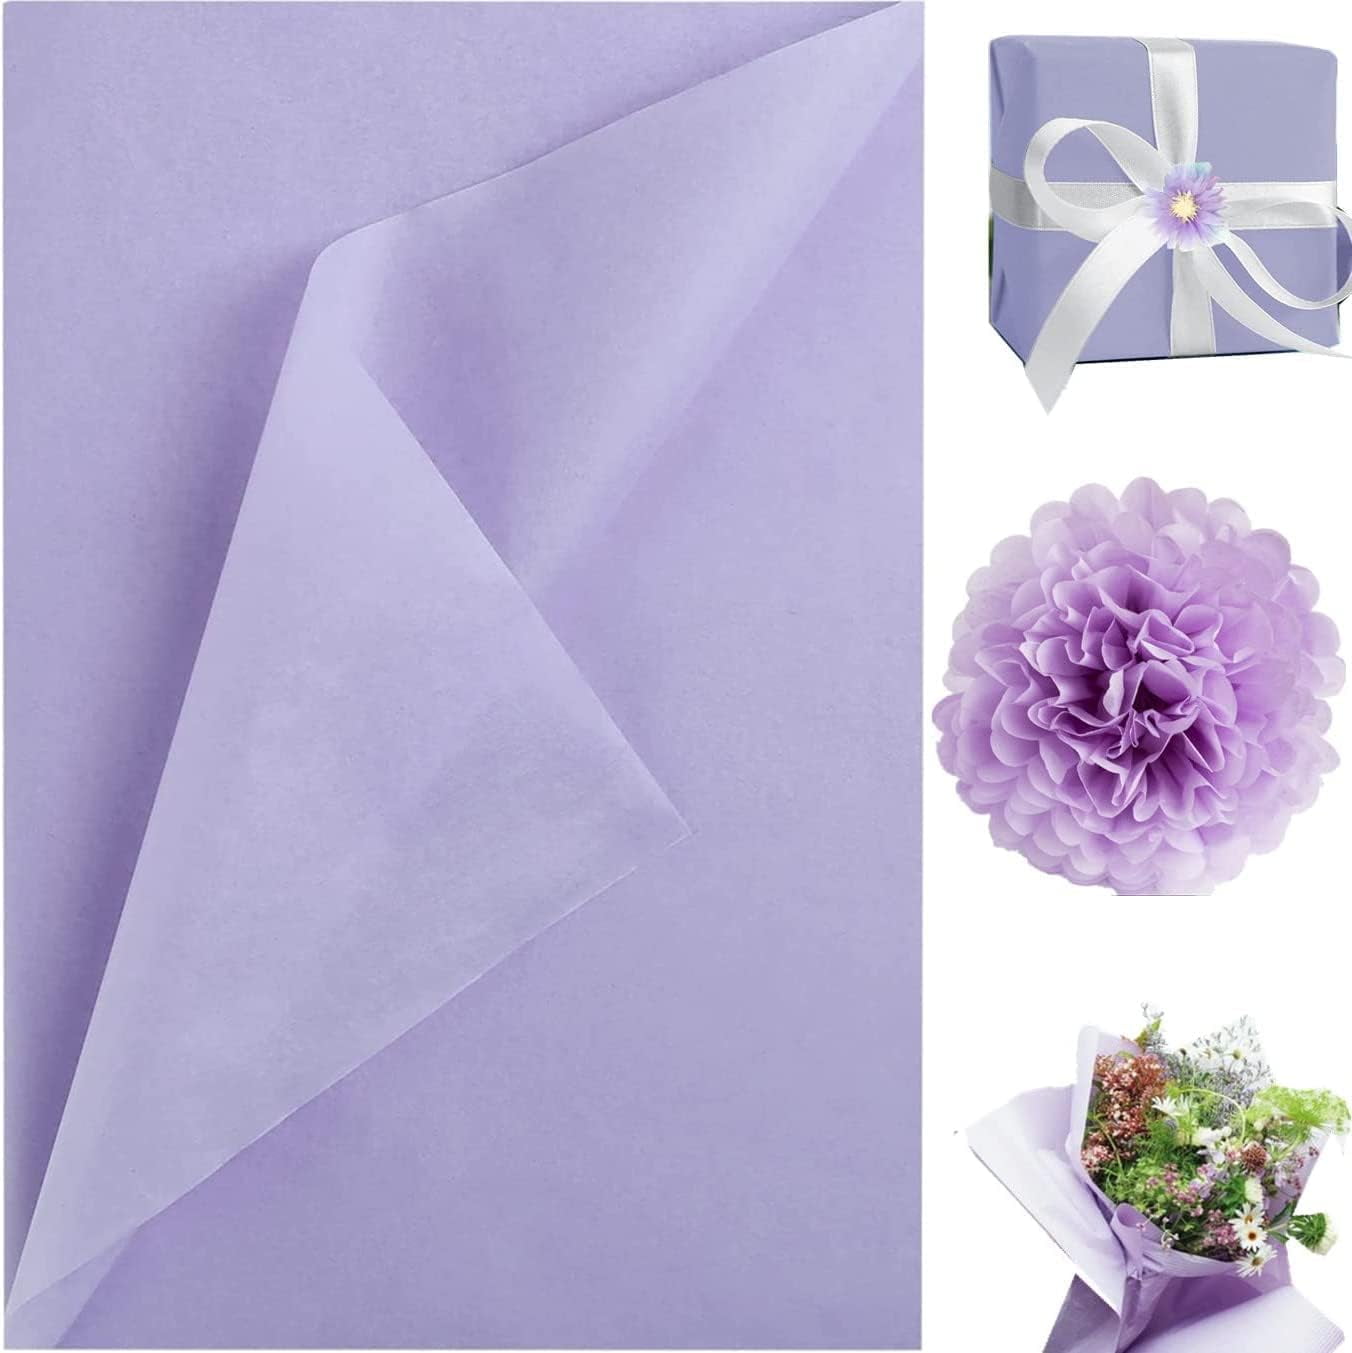 Naler 60 Sheets Christmas Tissue Paper Bulk, 20x 20 Wrapping Tissue for  Gift Bags Birthday Party